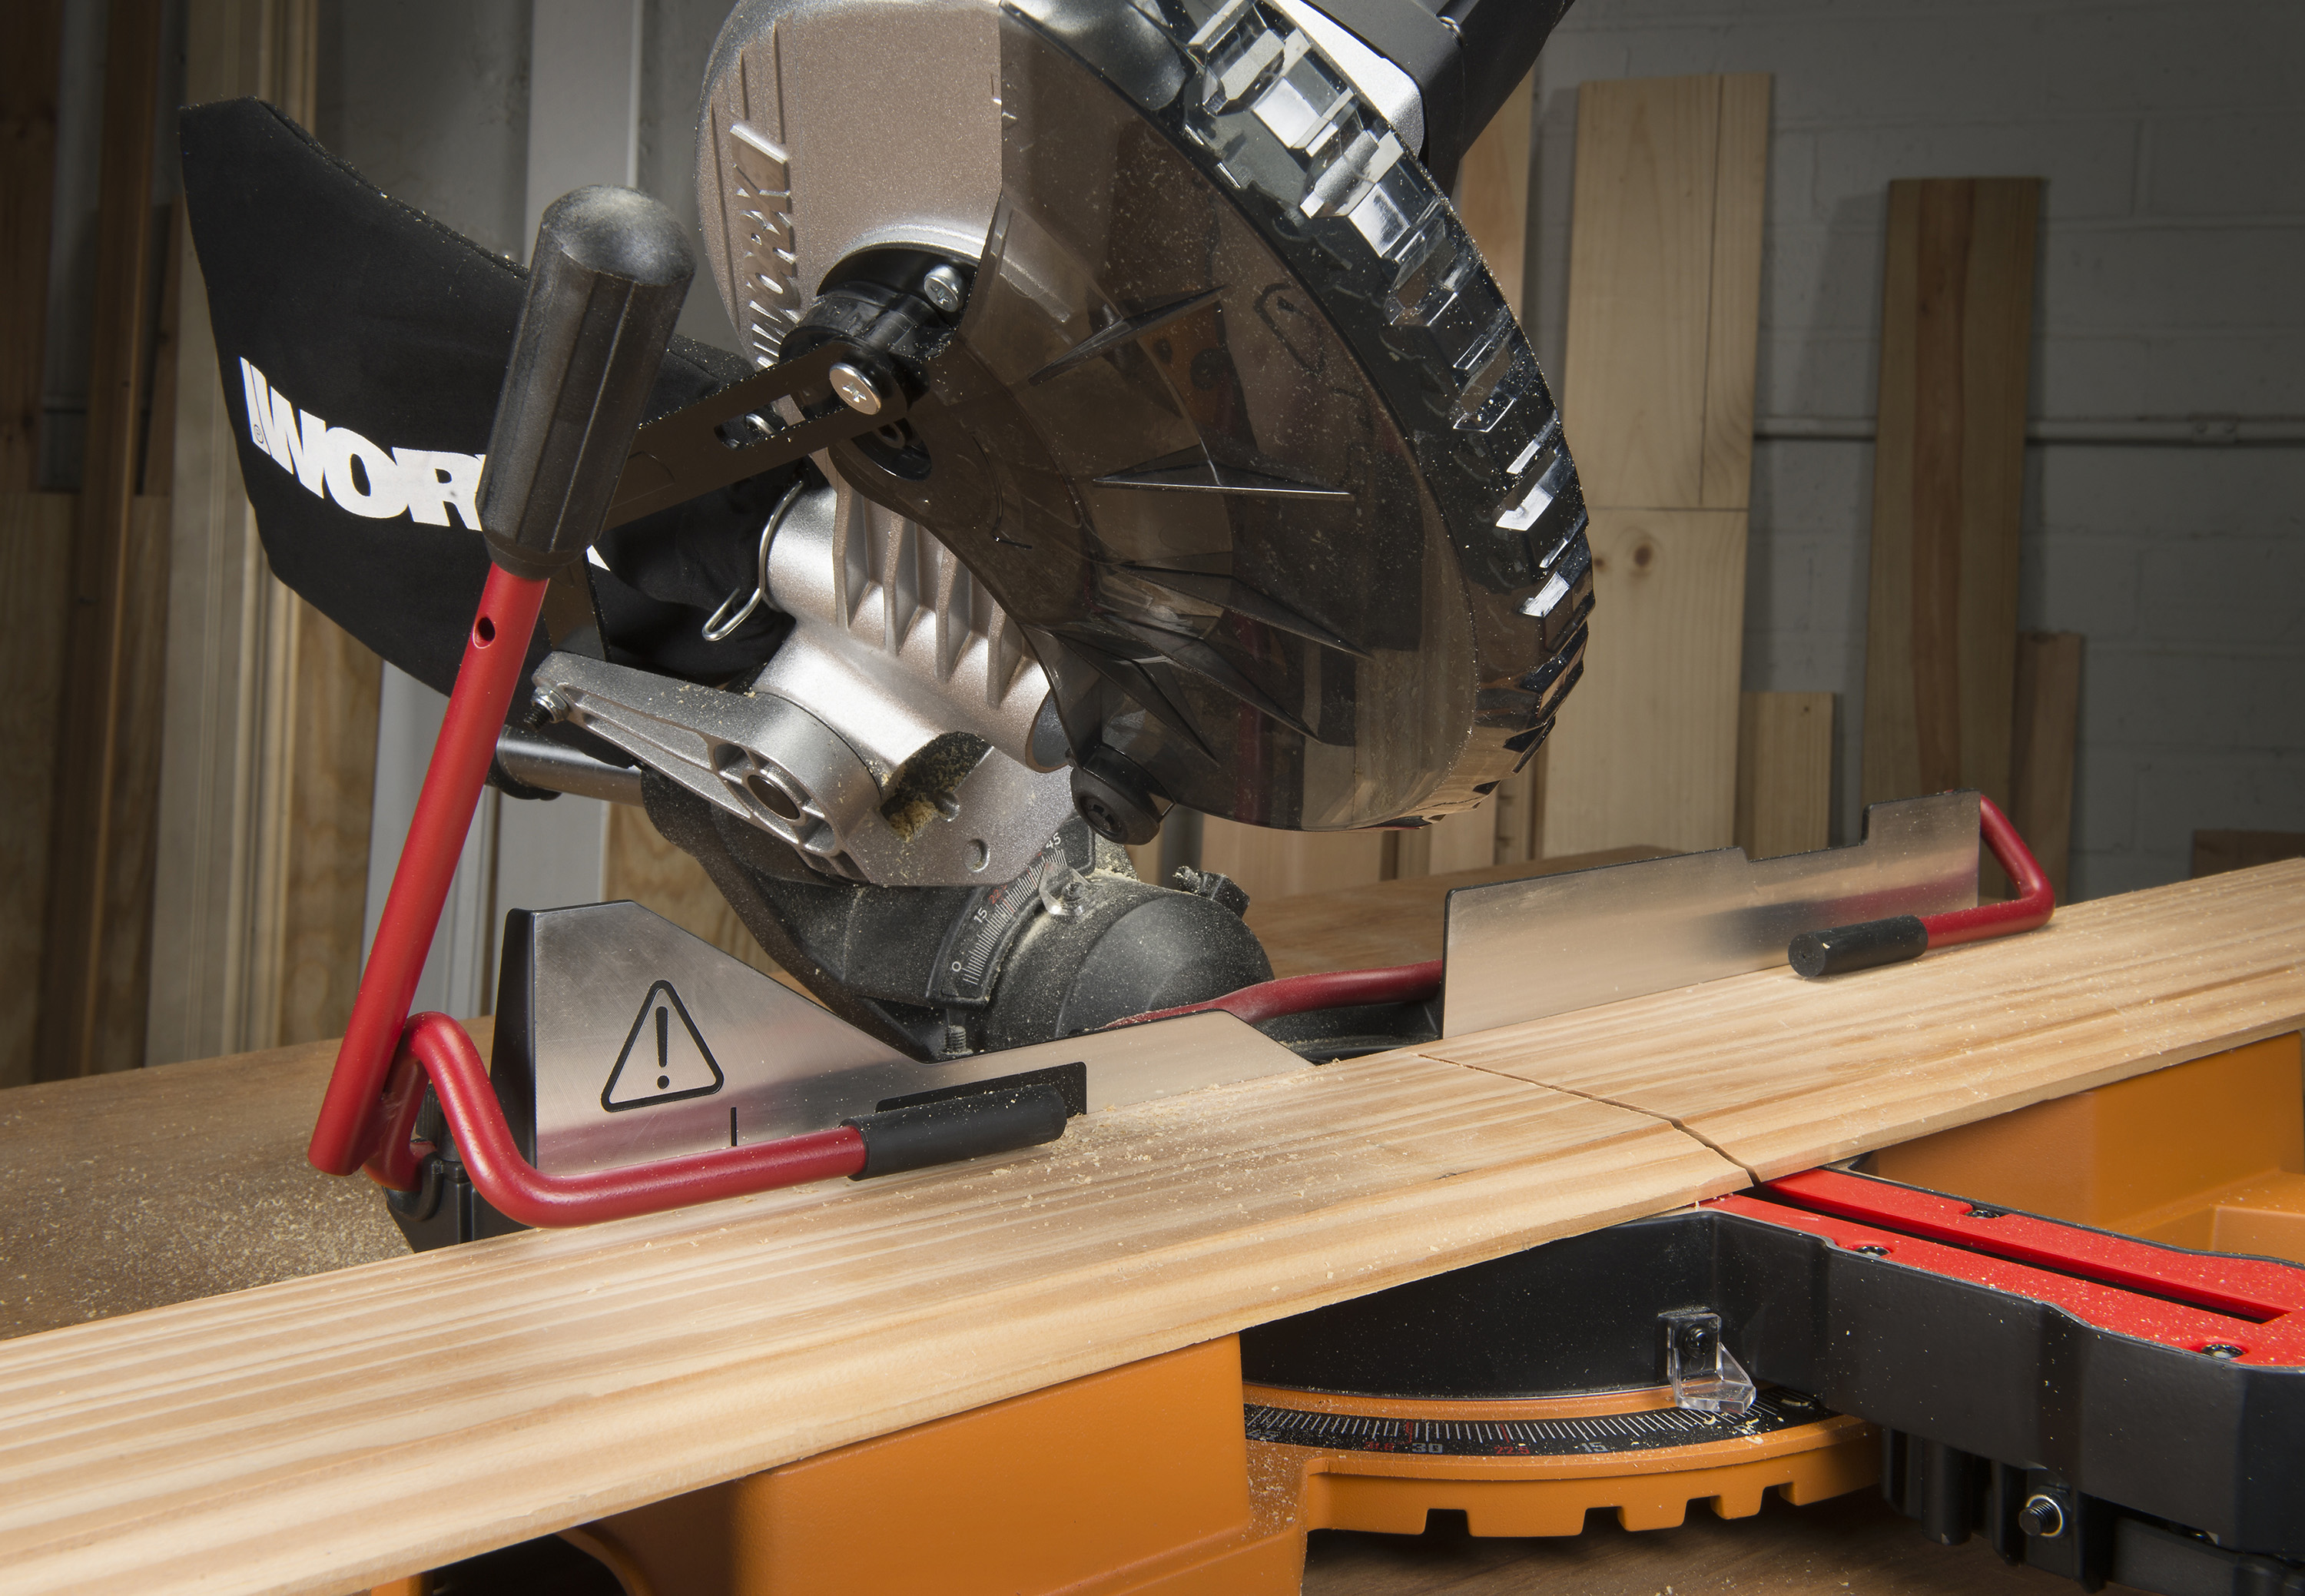 WORX 20V Power Share 7 ¼ in. Sliding Compound Miter Saw has built-in, hold-down lever that secures material throughout the cut, keeping hands away from blade.